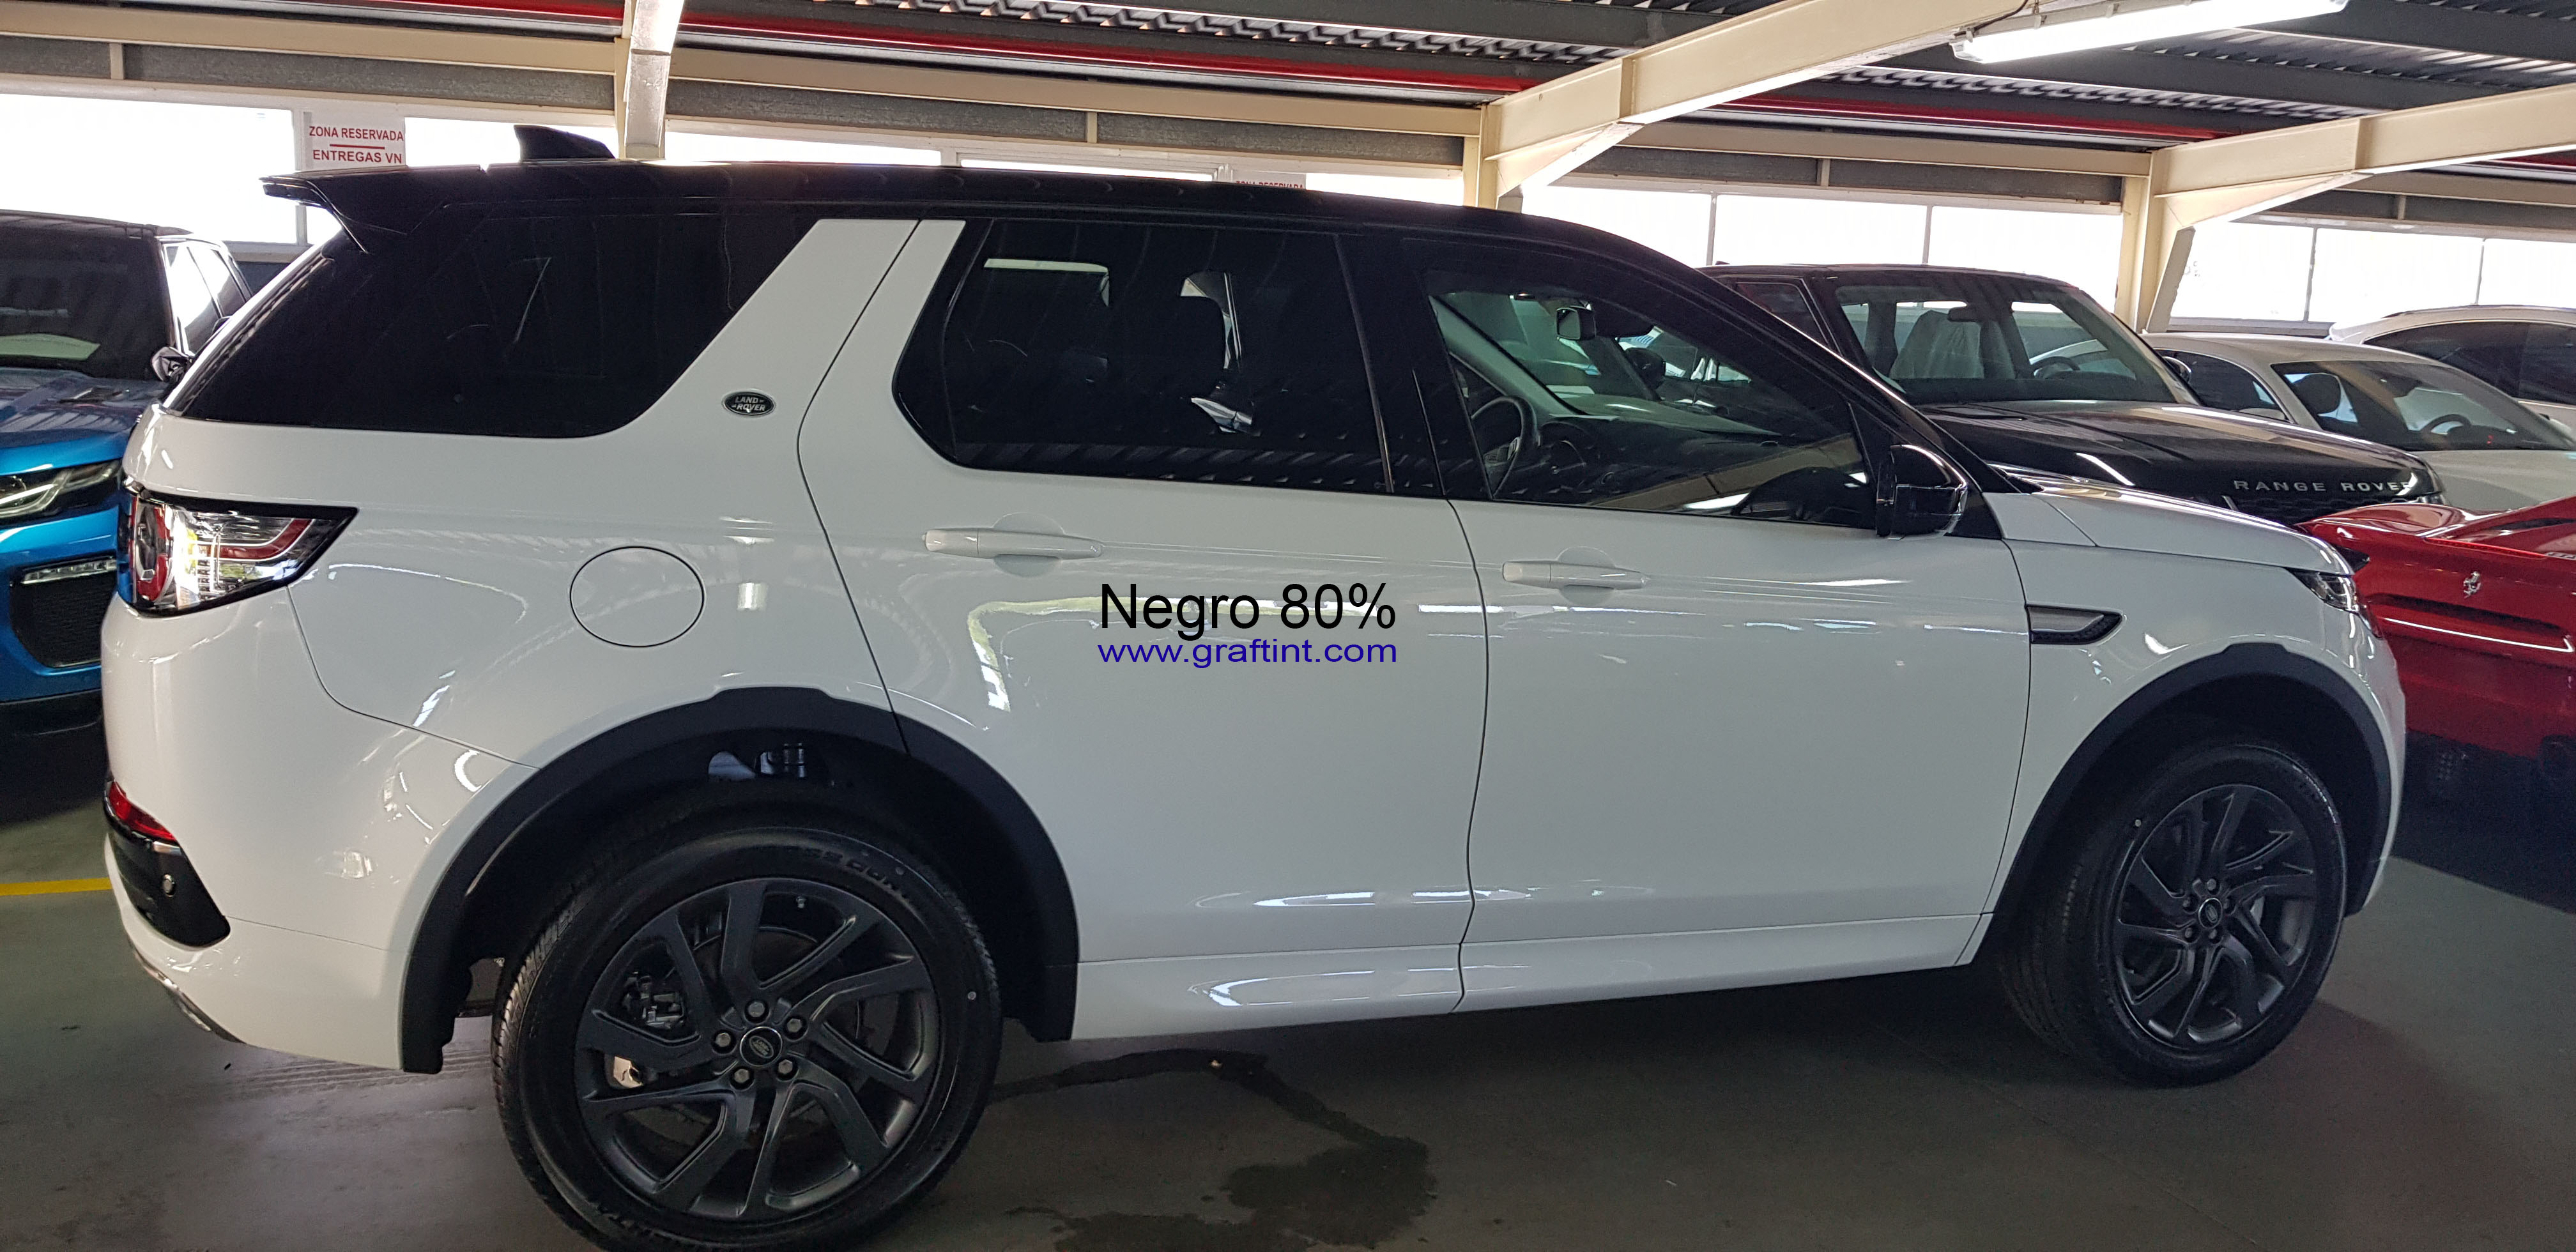 Discovery Sport - 80% (1)